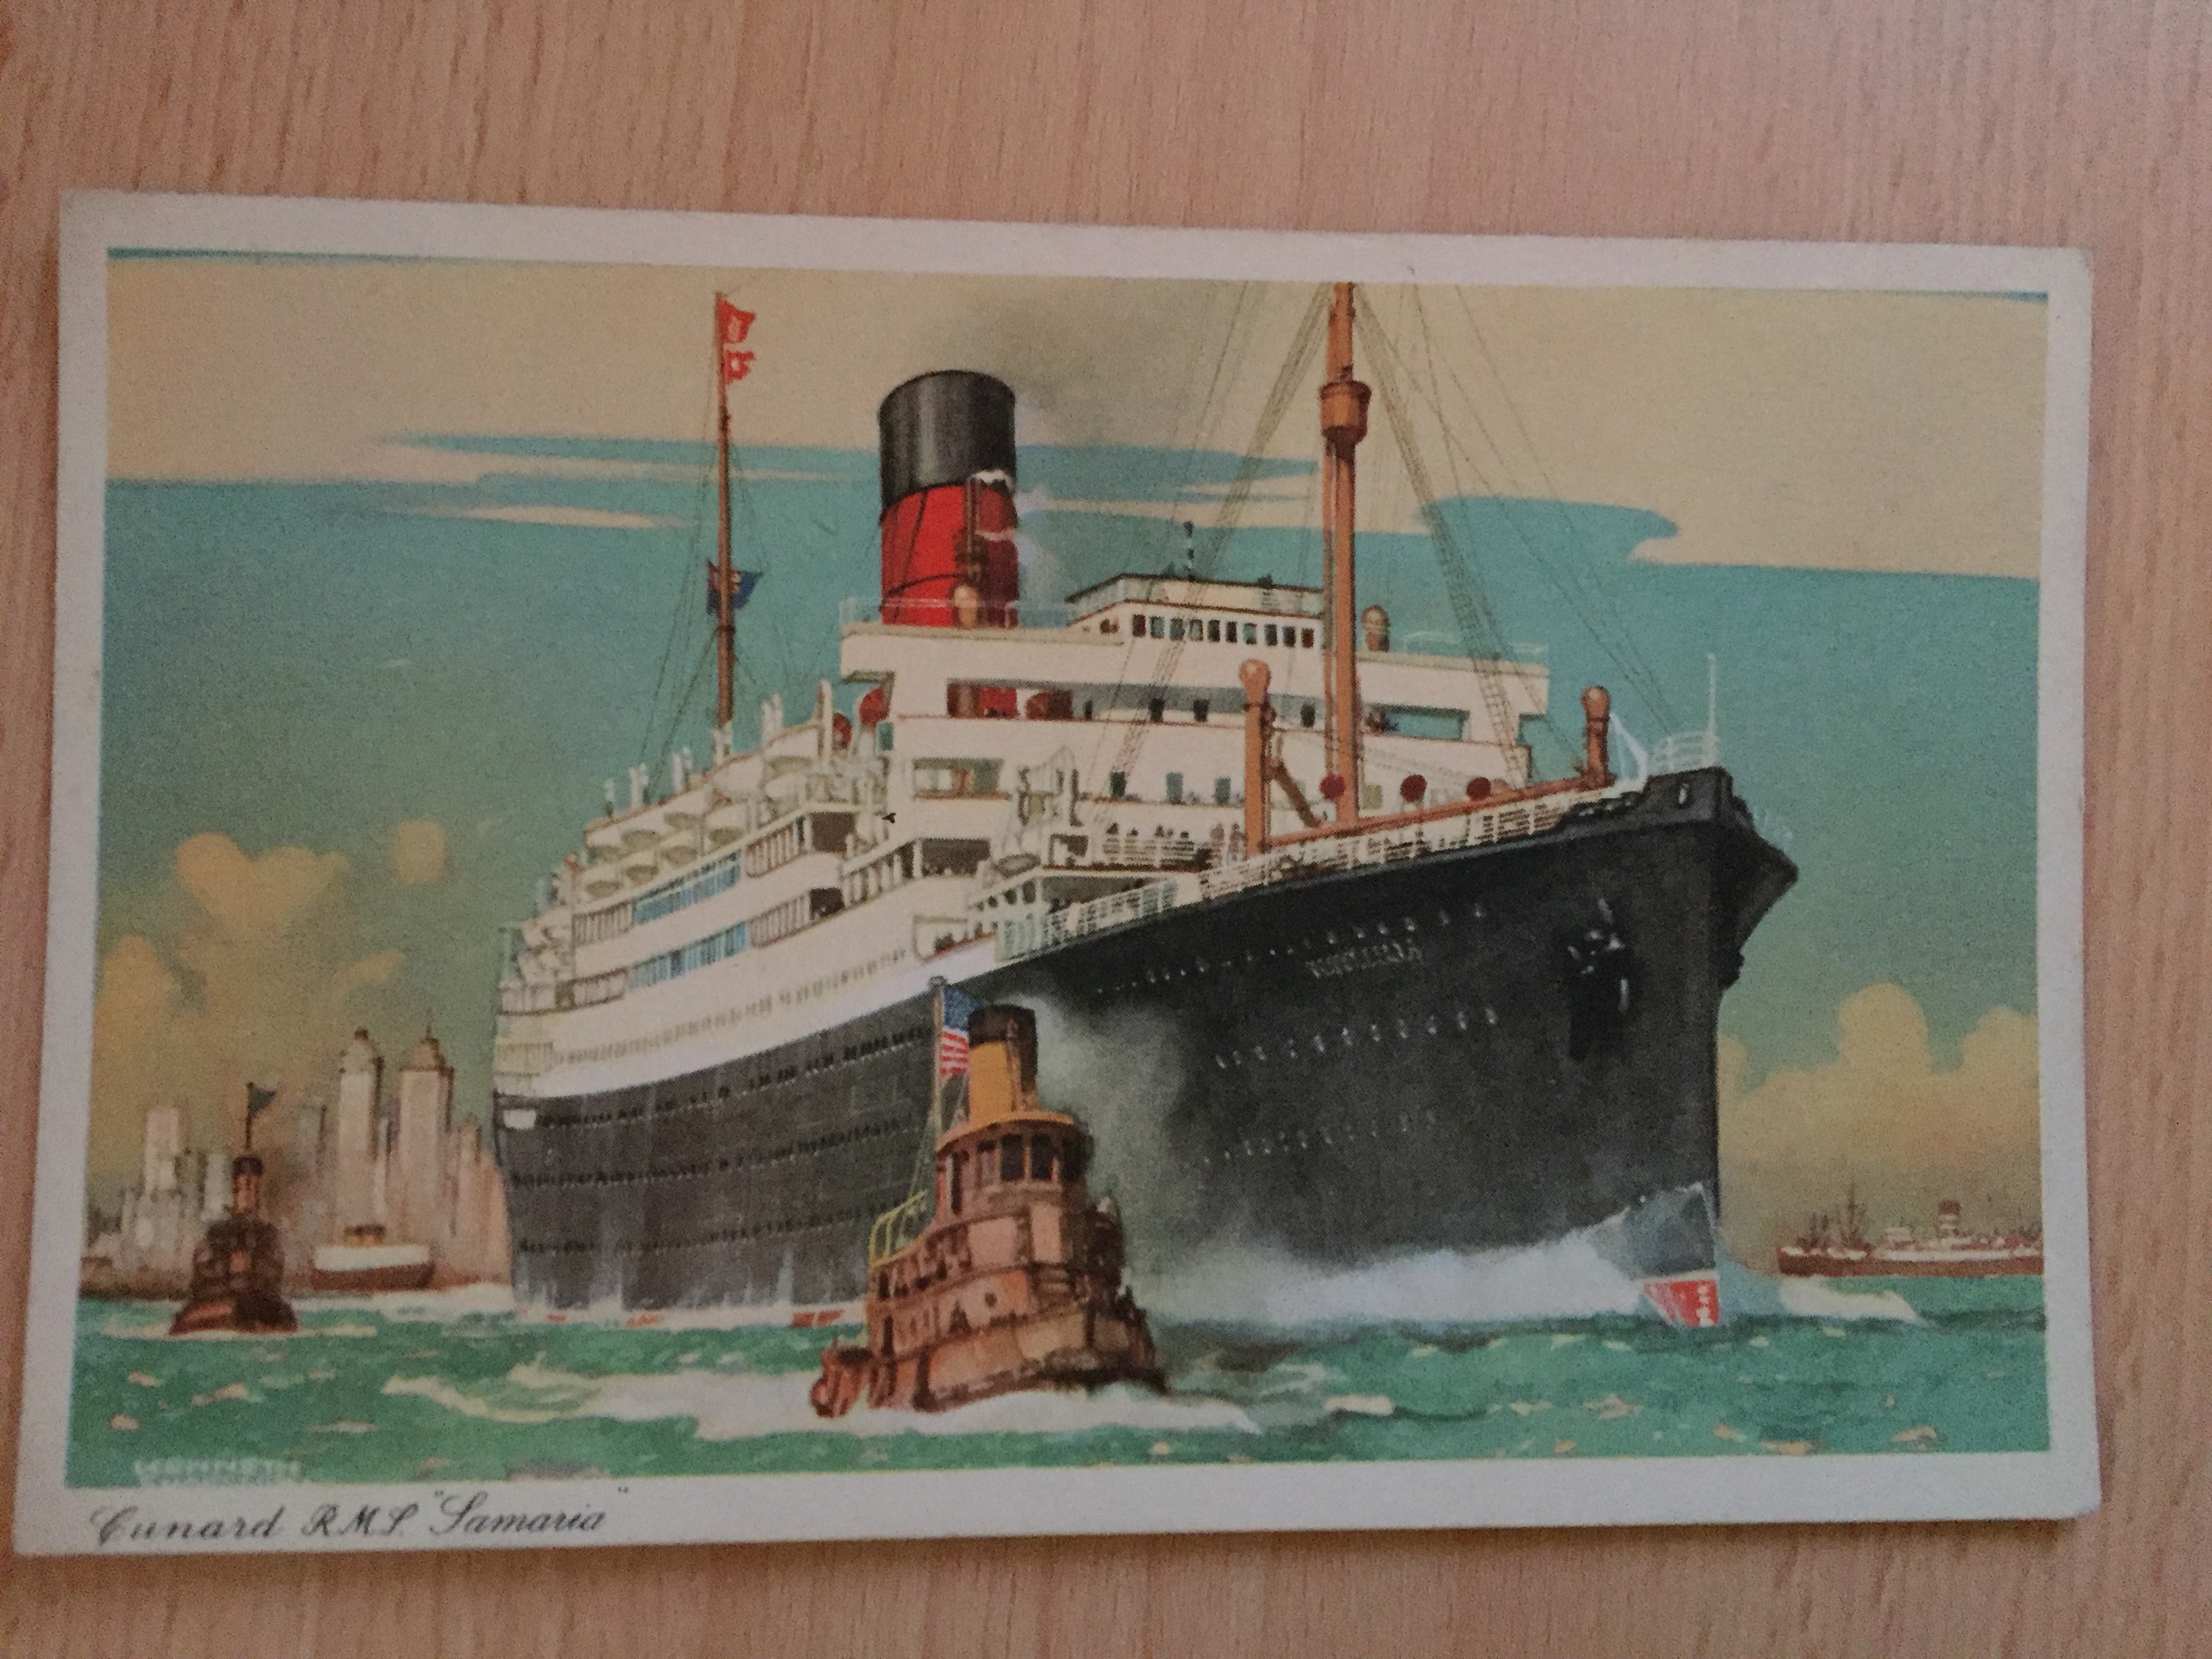 UNUSED COLOUR POSTCARD FROM THE WHITE STAR LINE VESSEL RMS SAMARIA